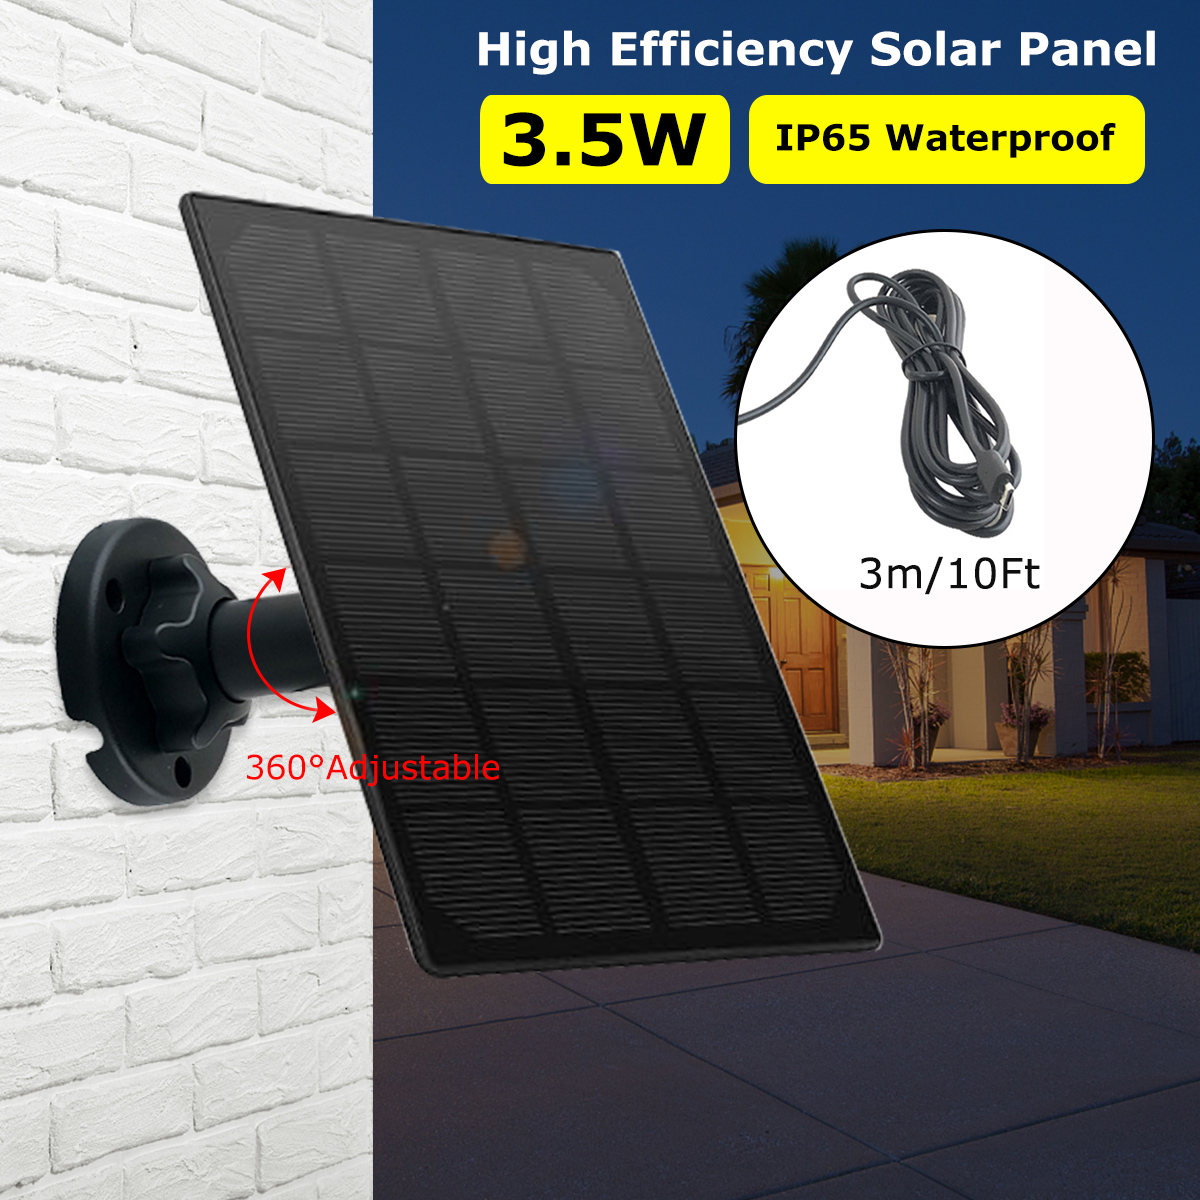 5V-High-Efficiency-Waterproof-Solar-Panel-For-Security-Camera-With-3m10Ft-Charging-Cable-for-IP-CCTV-1845858-3